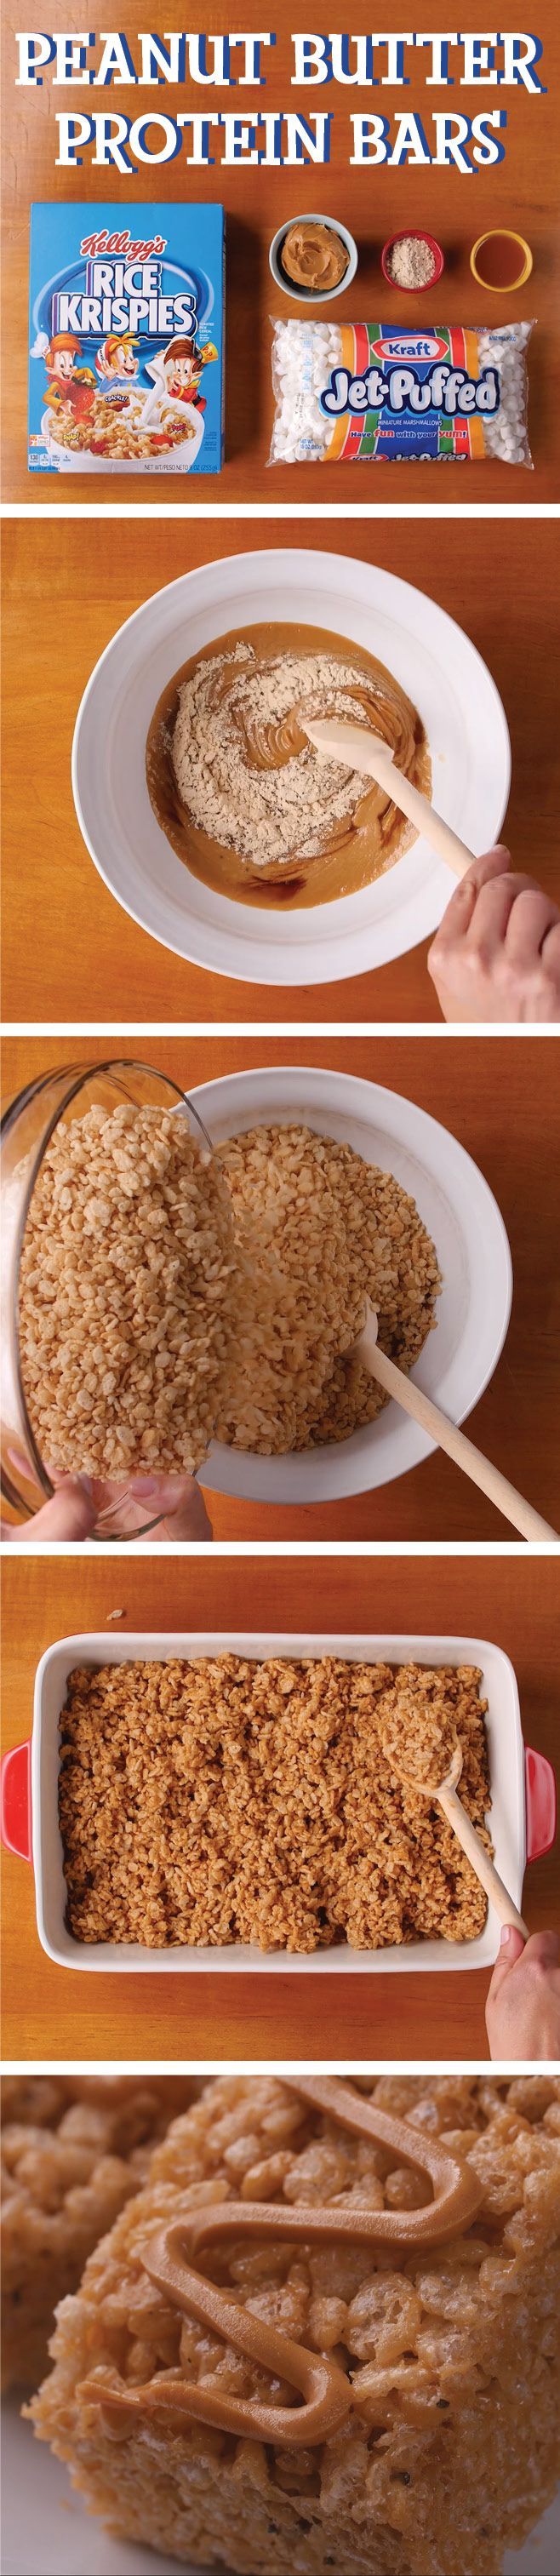 Power your day like a pro with delicious and dairy-free Rice Krispies® Peanut But